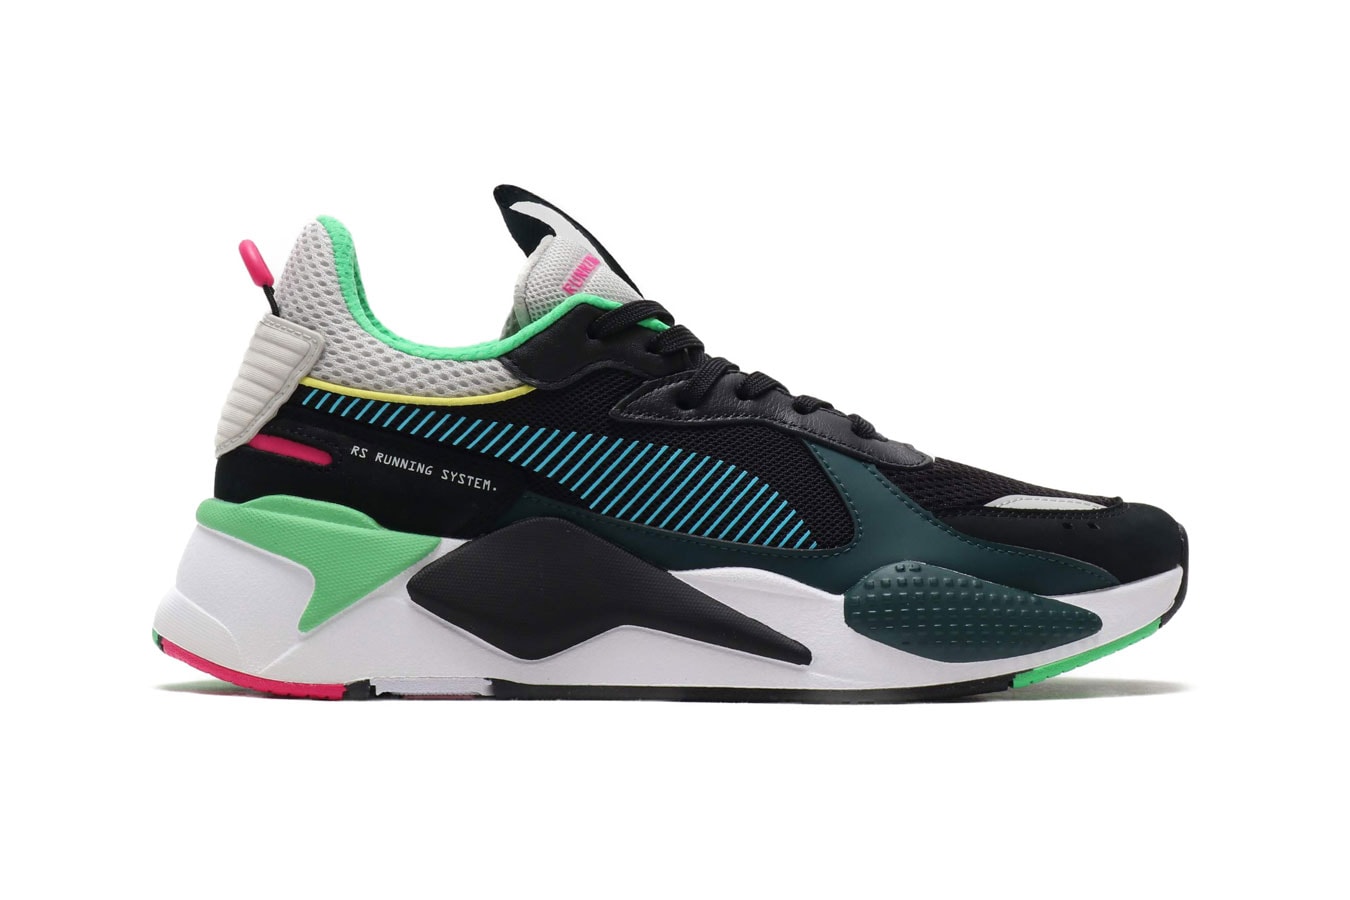 Puma RS-X Toys Black Colorway Sneaker Details Shoes Trainers Kicks Sneakers Footwear Cop Purchase Buy Available Online Now teal pink white grey gray blue green